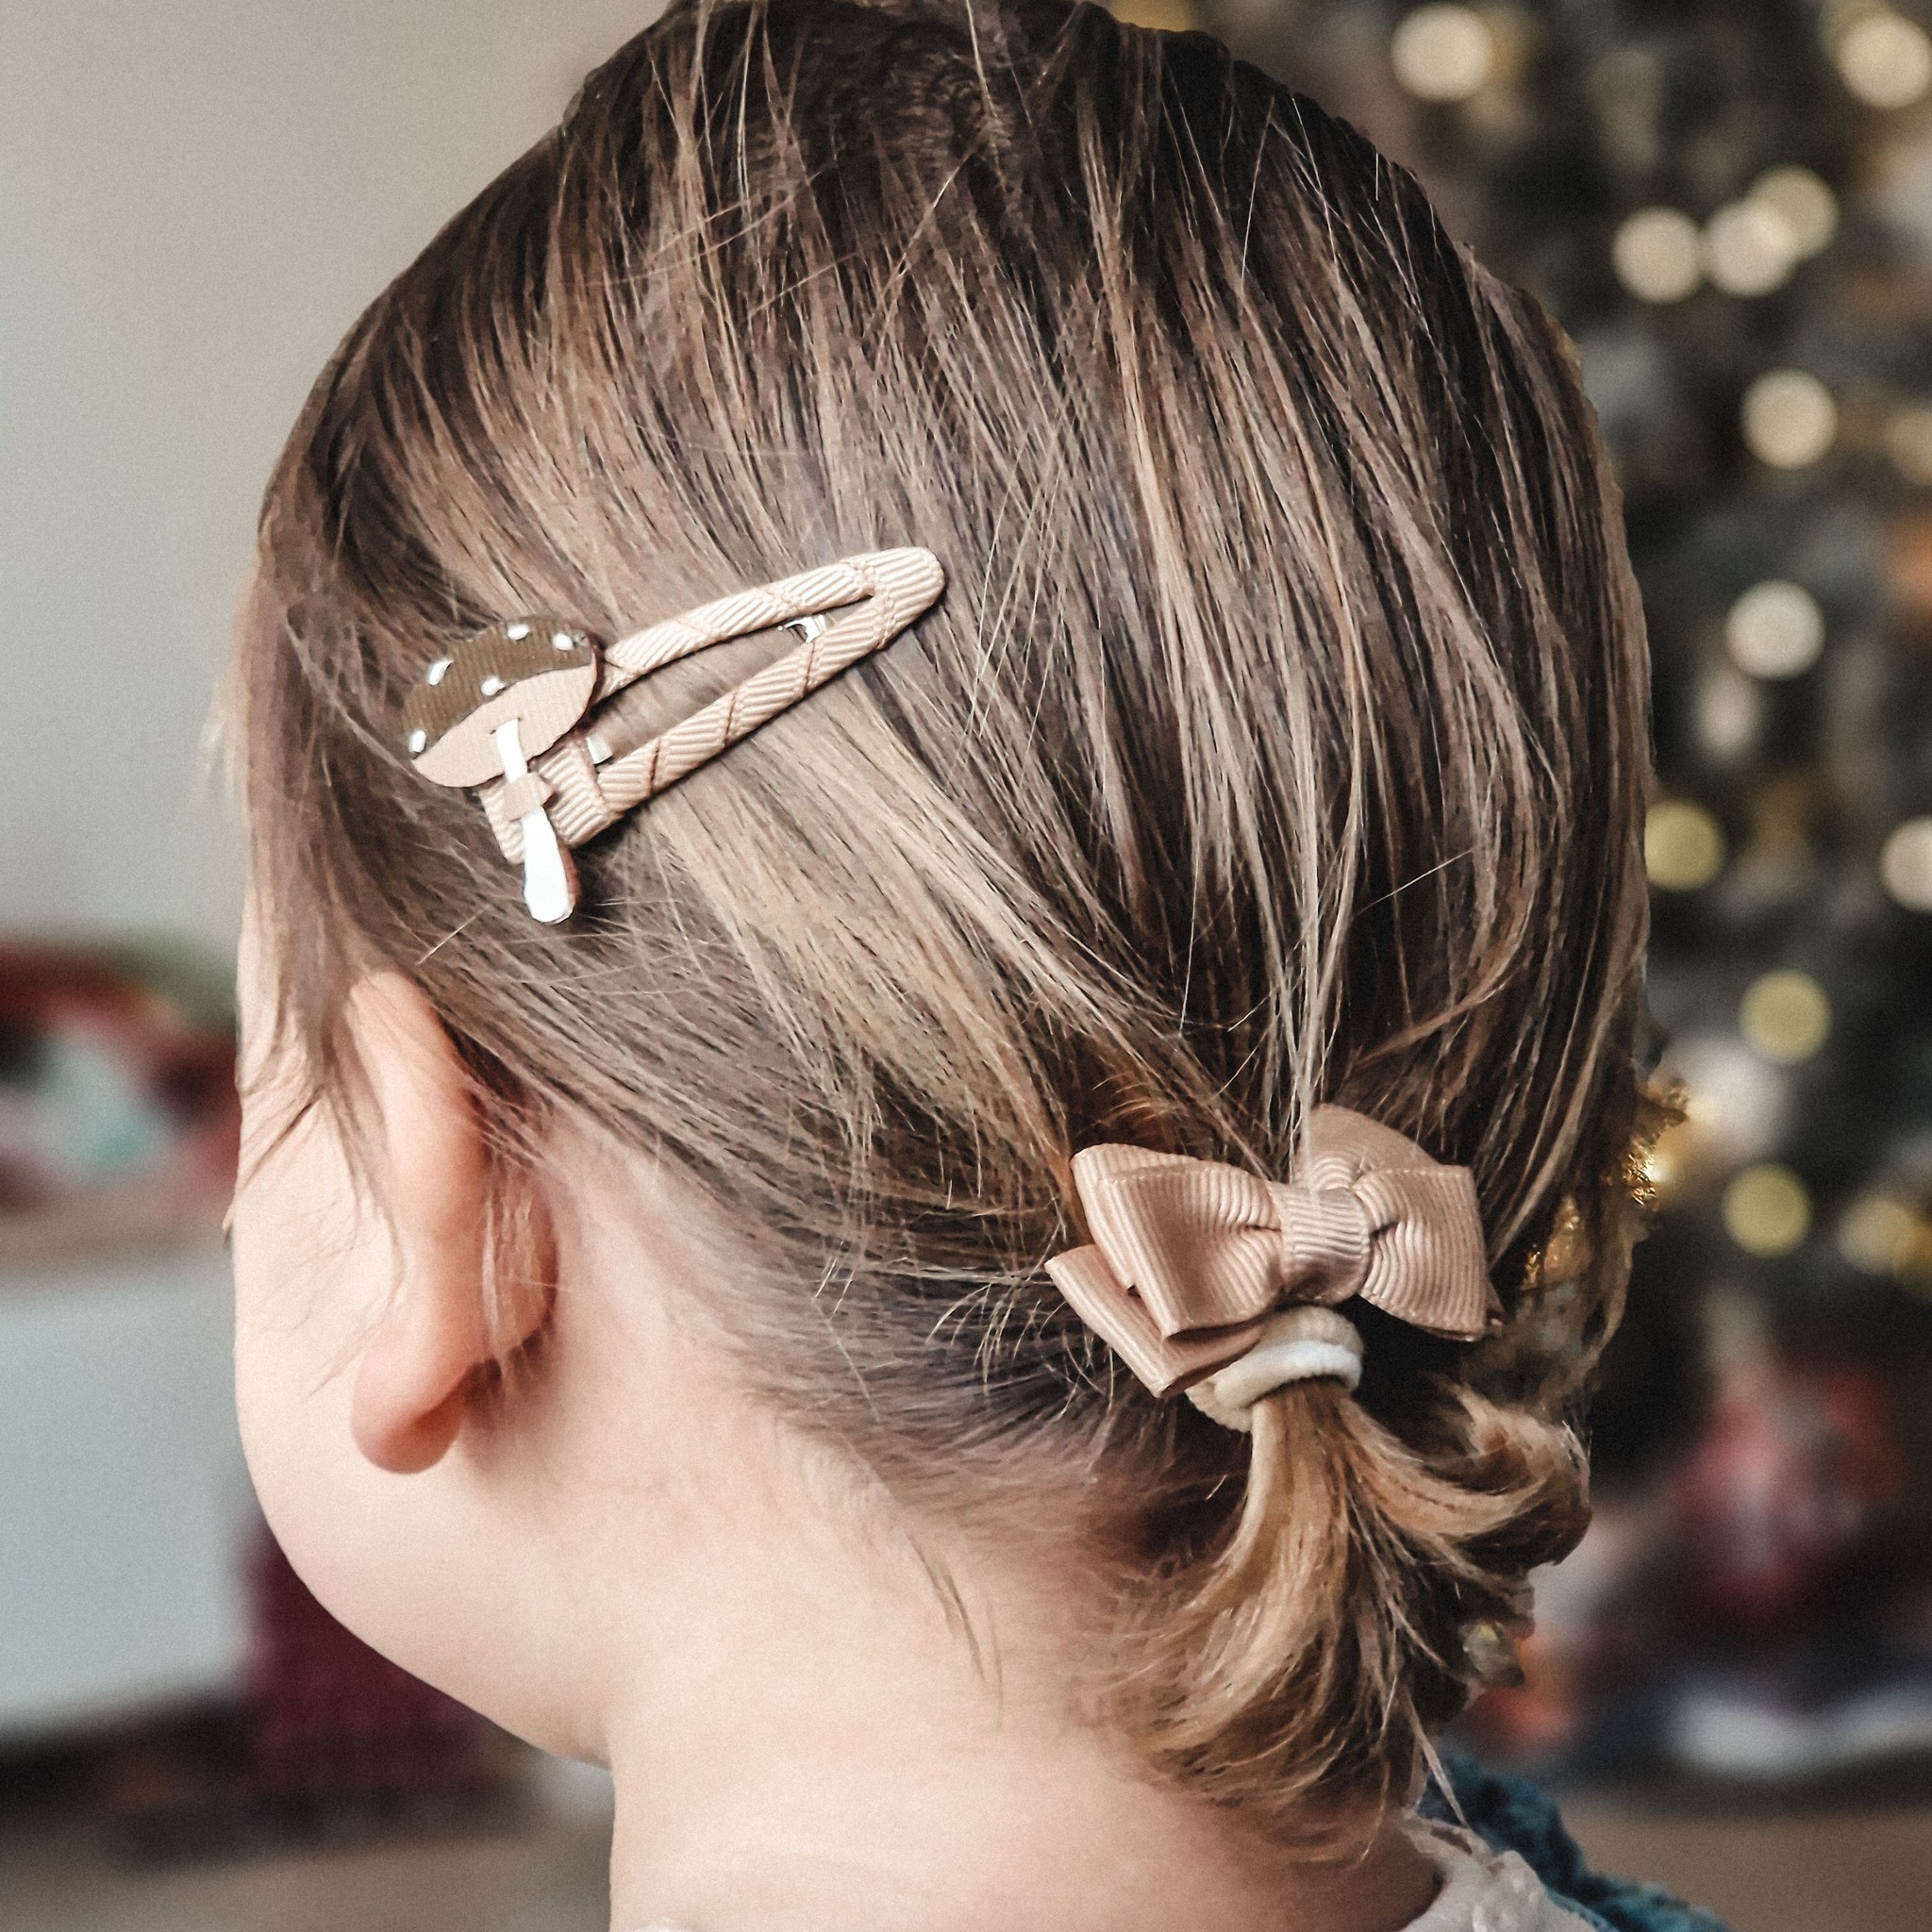 Cute hair accessories from Aldo Shoes | Sparkly hair accessories, Cute  hairstyles, Medium hair styles